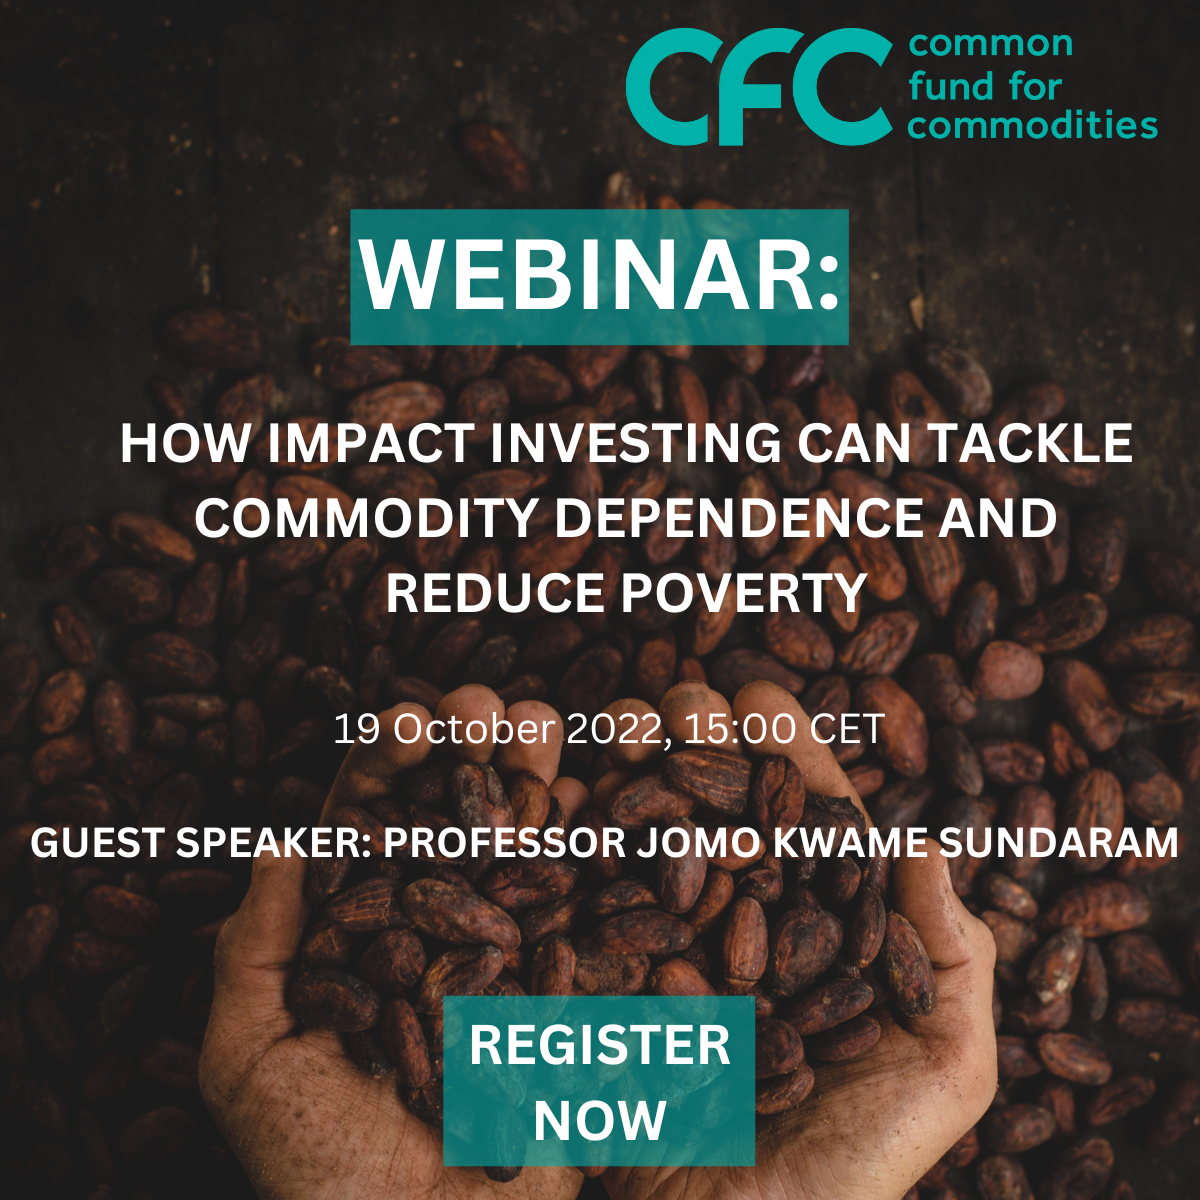 How impact investing can tackle commodity dependence and reduce poverty